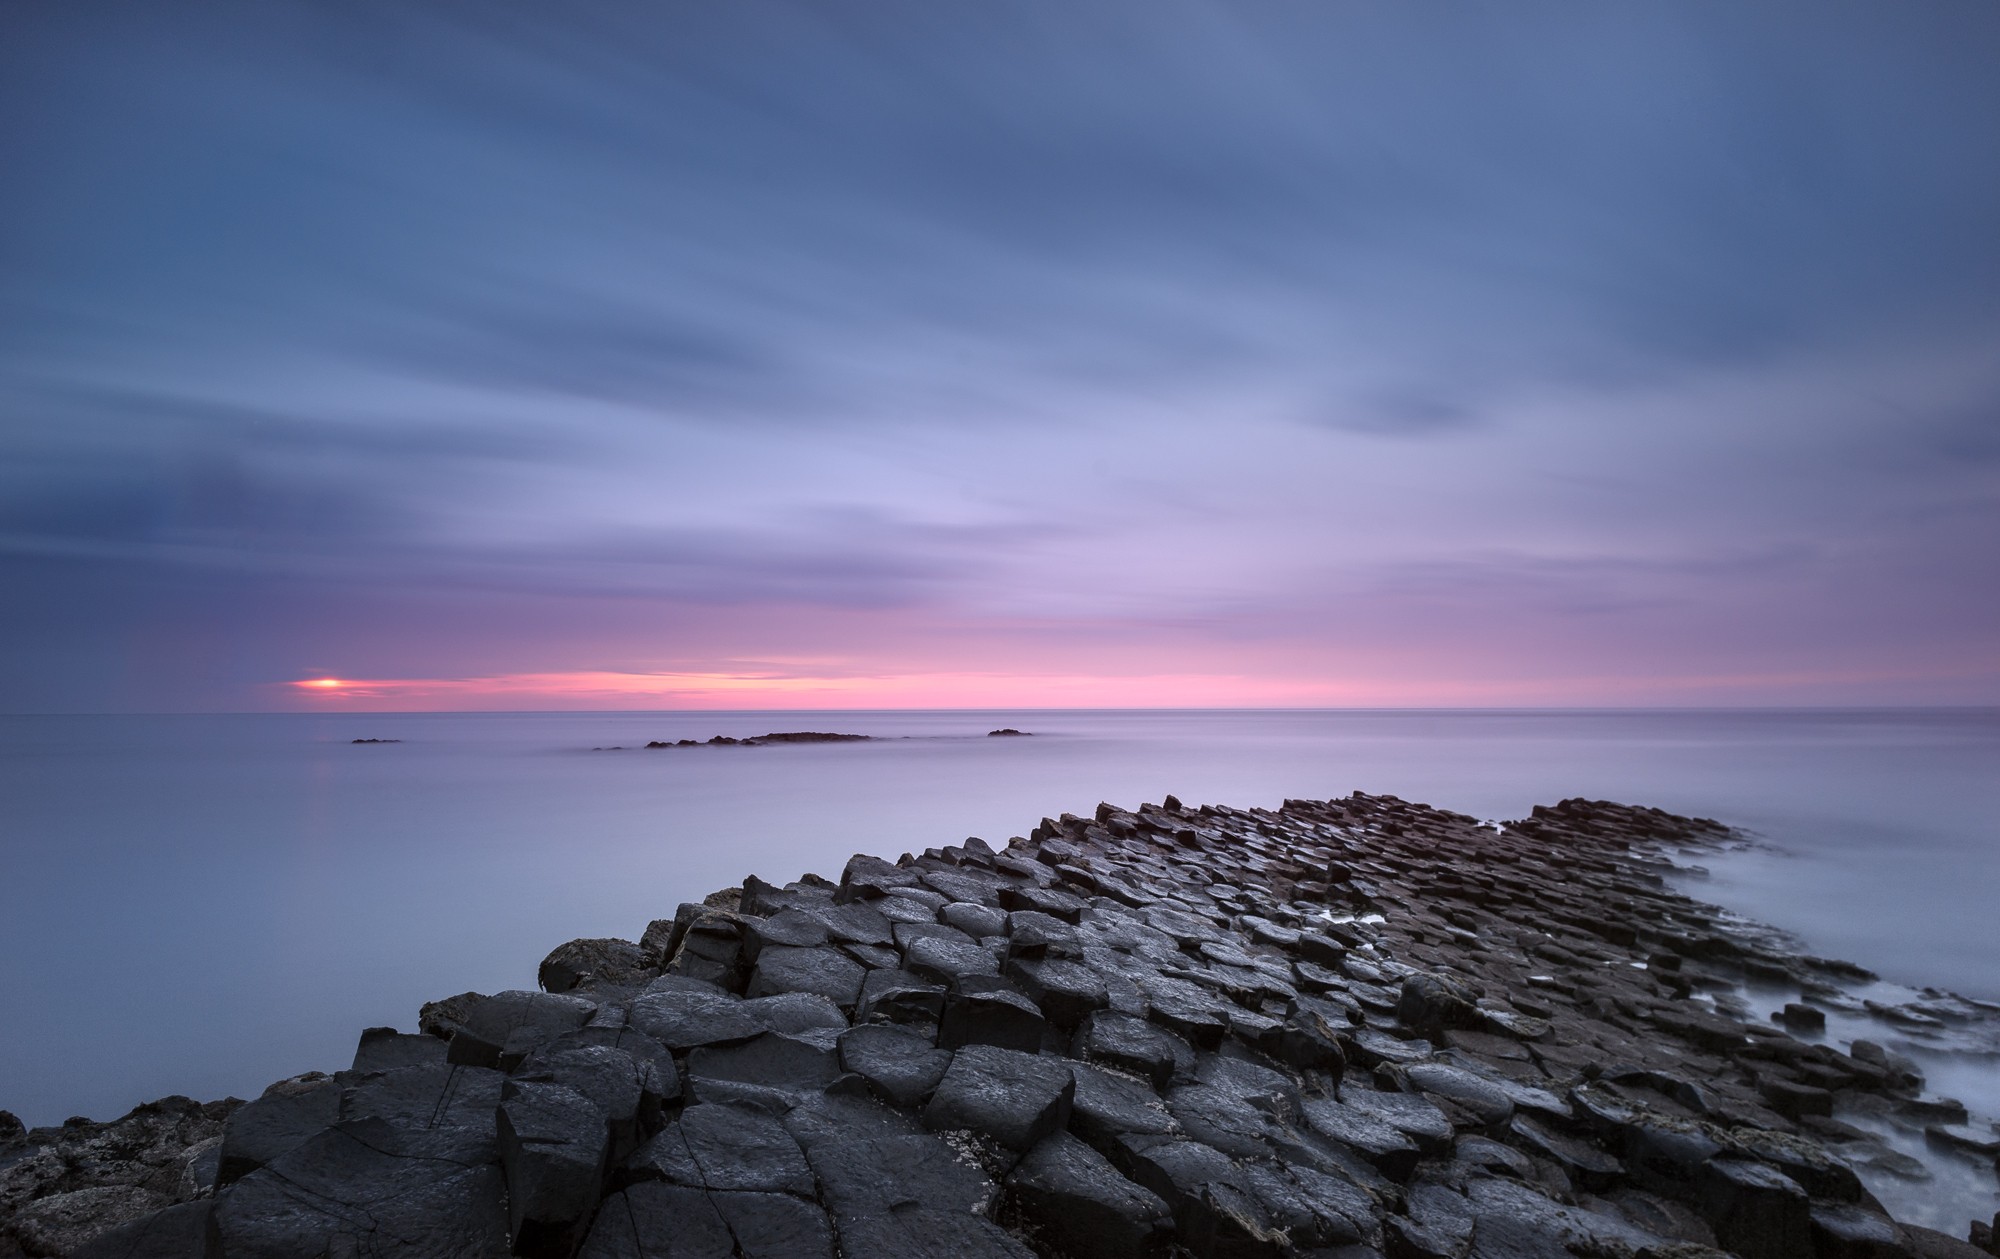 General 2000x1259 nature landscape Giant's Causeway sea waves rocks rock formation long exposure sunset horizon clouds Northern Ireland low light